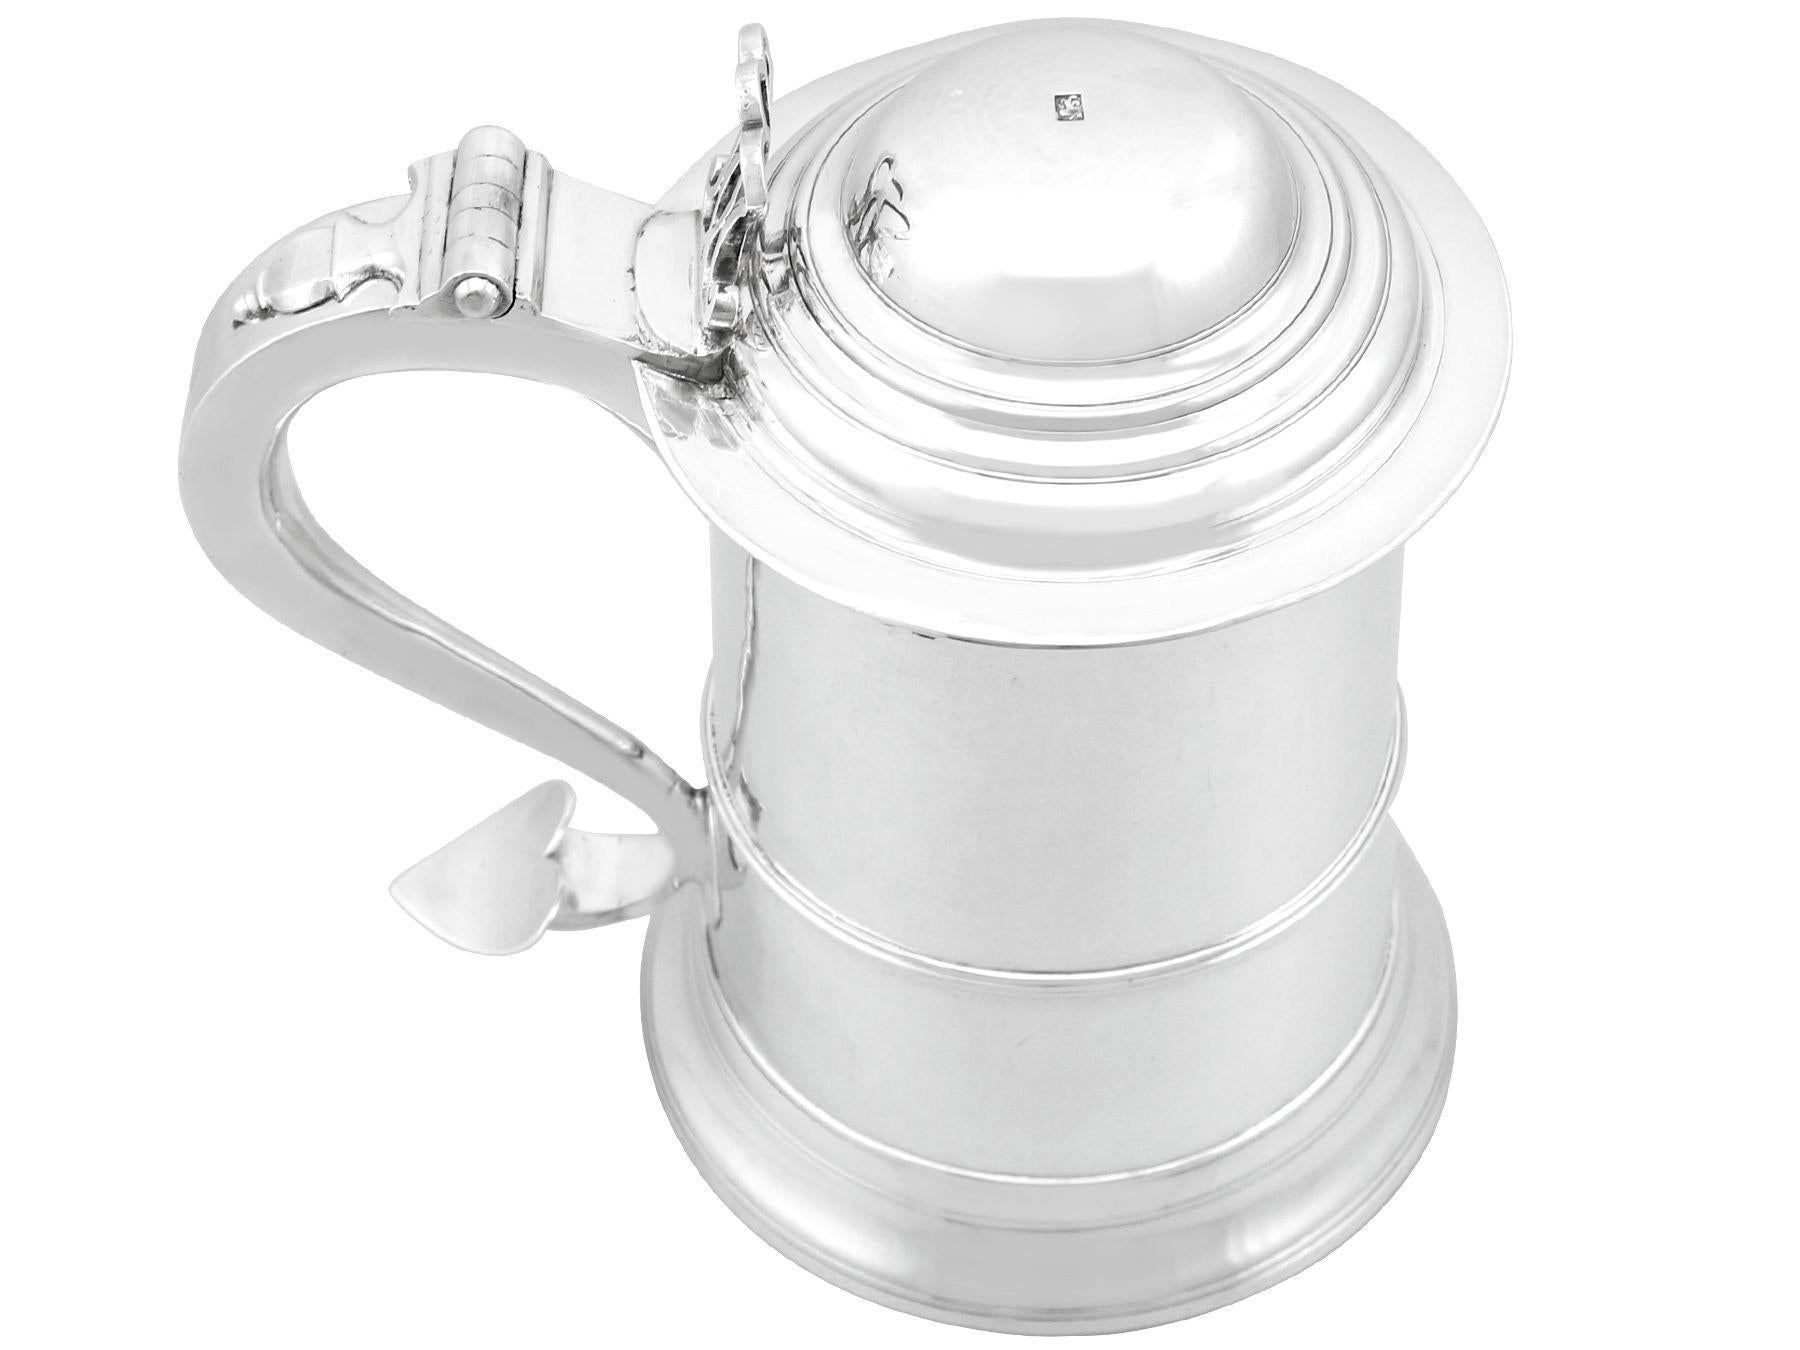 An exceptional, fine and impressive antique George III Newcastle sterling silver quart tankard made by John Langlands I & John Robertson I; an addition to our Georgian silver tankard collection.

This exceptional antique Georgian sterling silver